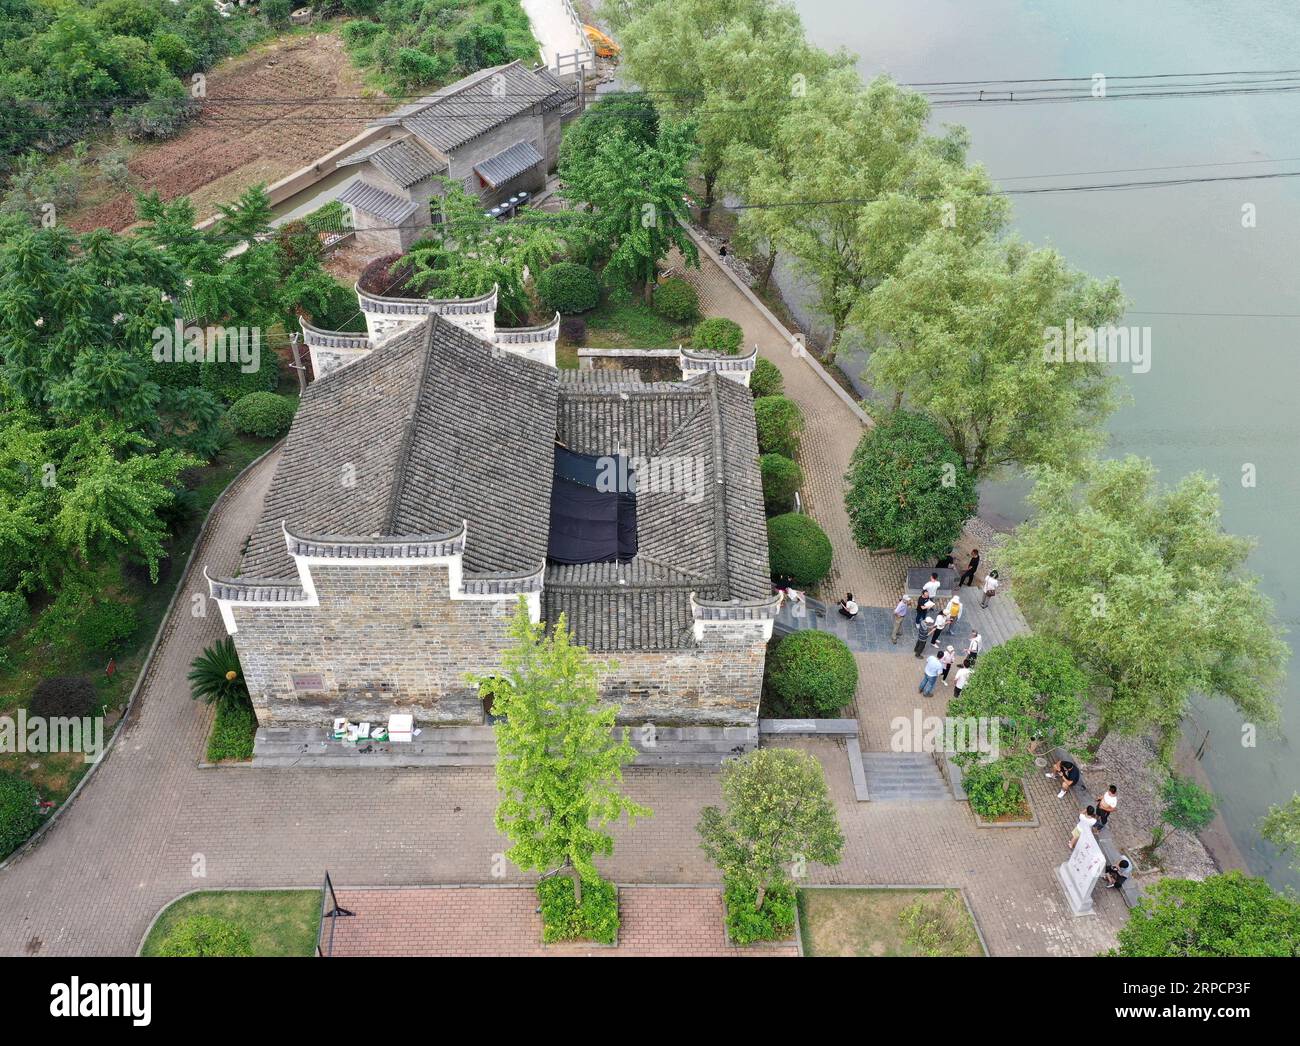 (190710) -- XING AN, July 10, 2019 -- Aerial photo taken on June 29, 2019 shows the Sanguantang building complex which once served as the Red Army s command headquarters during the 1934 Battle of Xiangjiang in Jieshou Town of Xing an County, south China s Guangxi Zhuang Autonomous Region. Memorial halls and martyrs cemeteries are springing up in many revolutionary places over the past few years, especially those along the Long March route. Visitors from all over China come to these memorials, reconnecting with history, reclaiming the Long March spirit and adding more momentum to the red touris Stock Photo